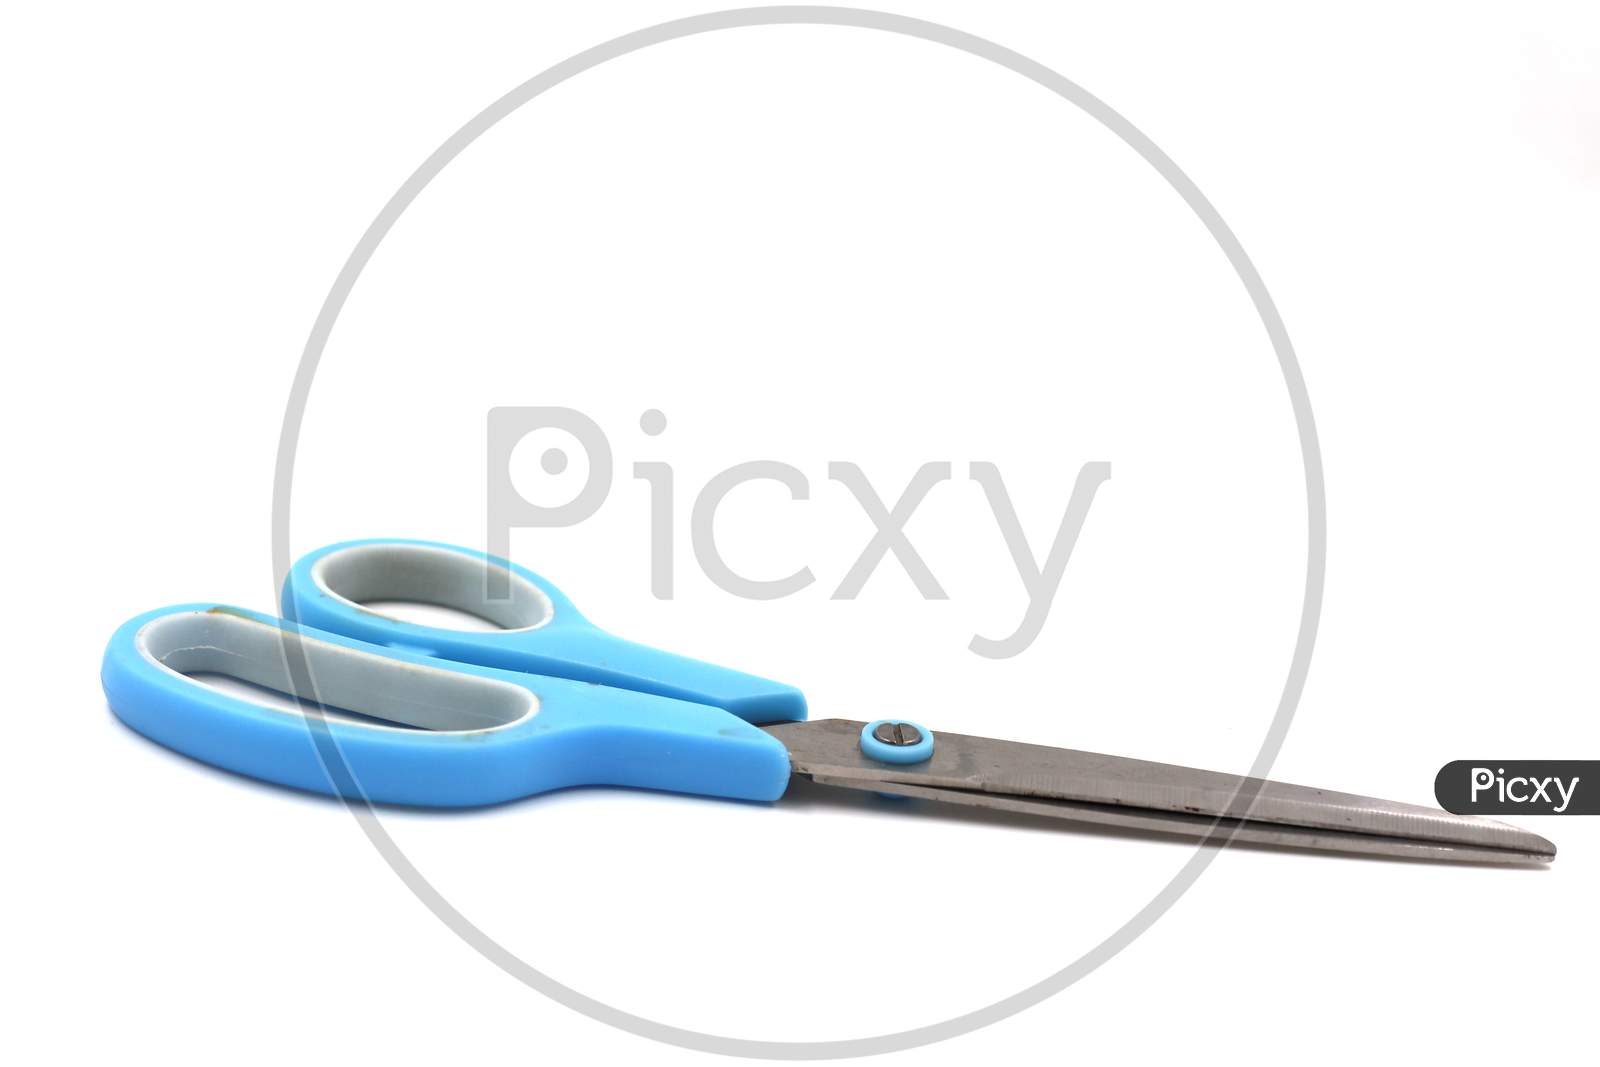 isolate sky color scissors on white background